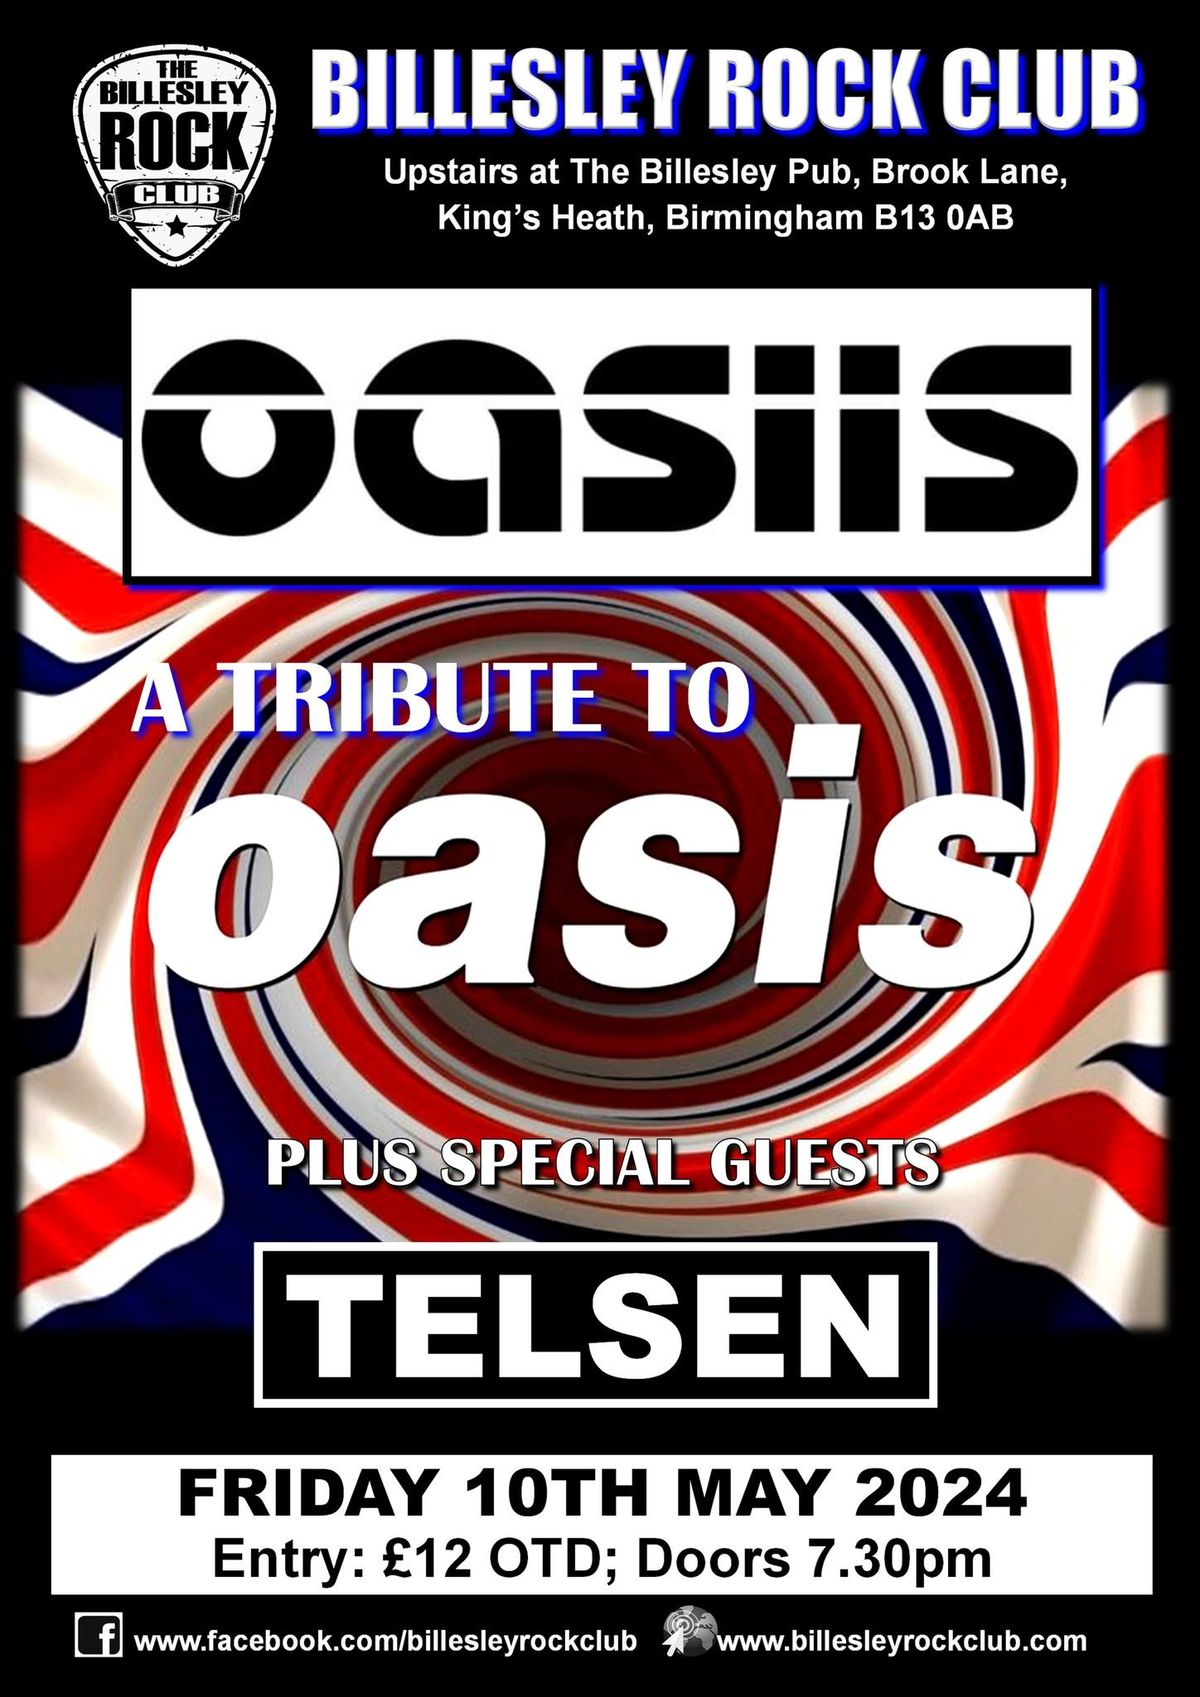 Oasiis (Oasis tribute) + special guests Telsen - \u00a312 OTD